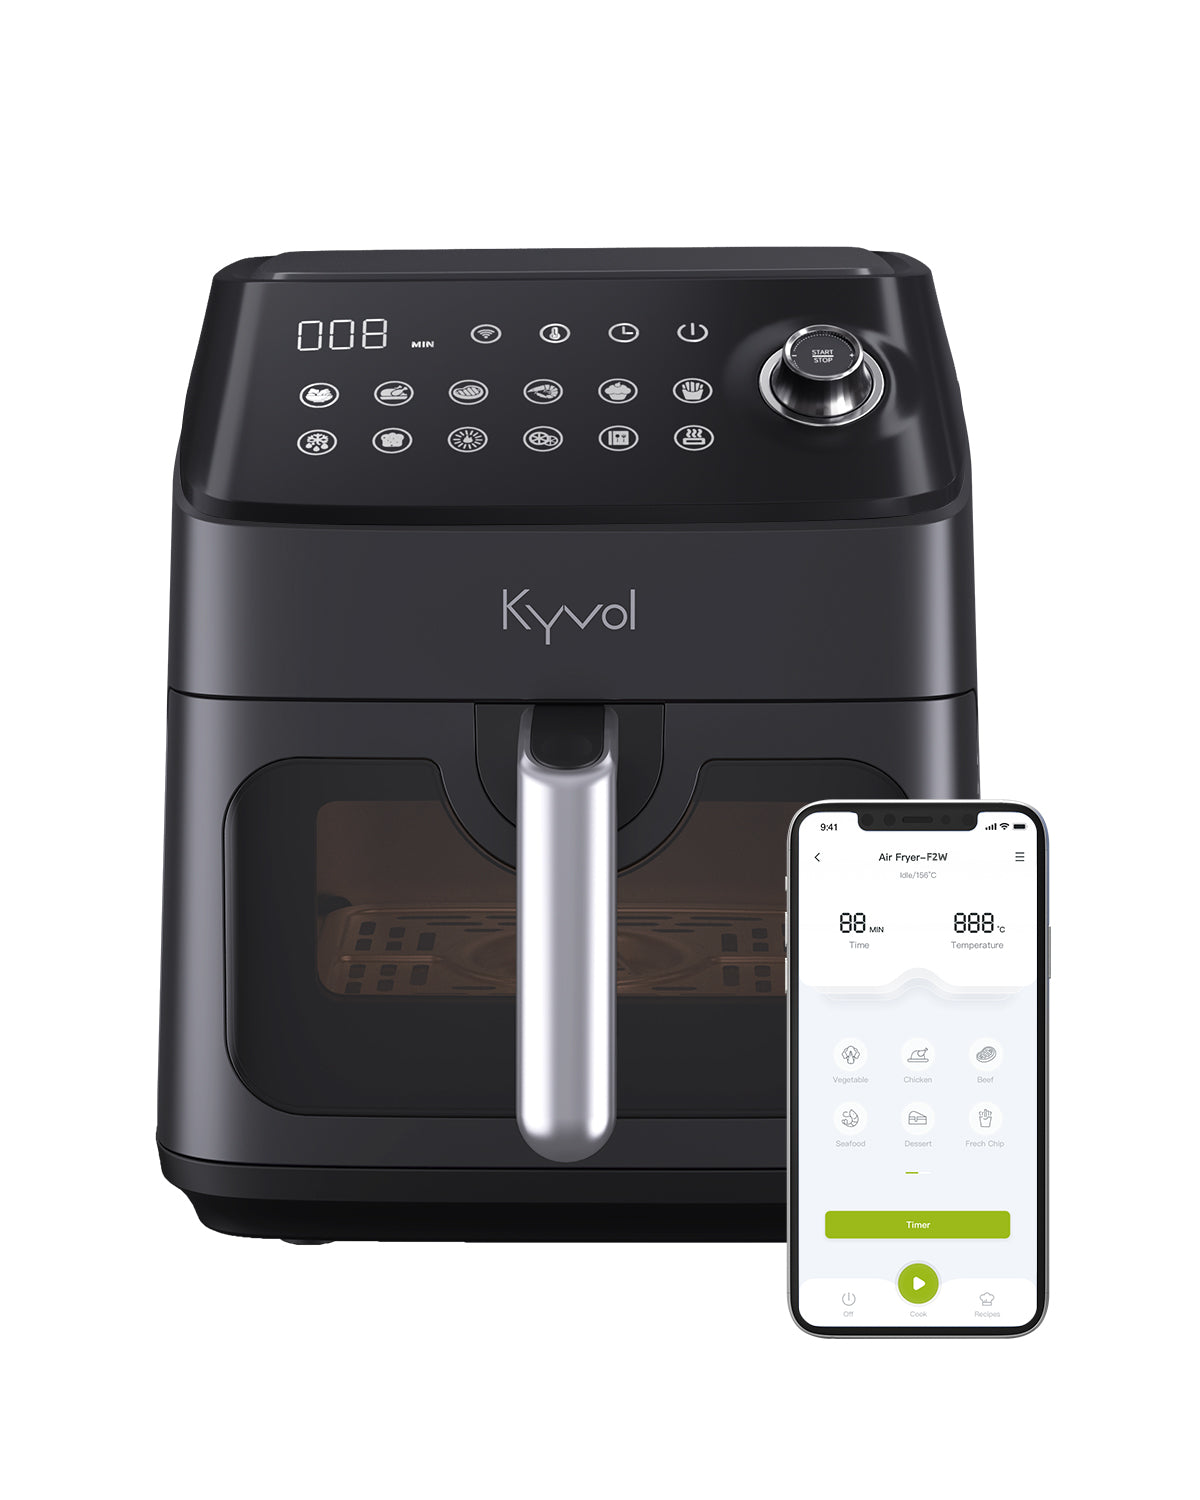 <span> Kyvol Epichef AF200 Air Fryer</span> <br /><span> 4.5QT Compact Size With 12-in-1 Presetting </span>